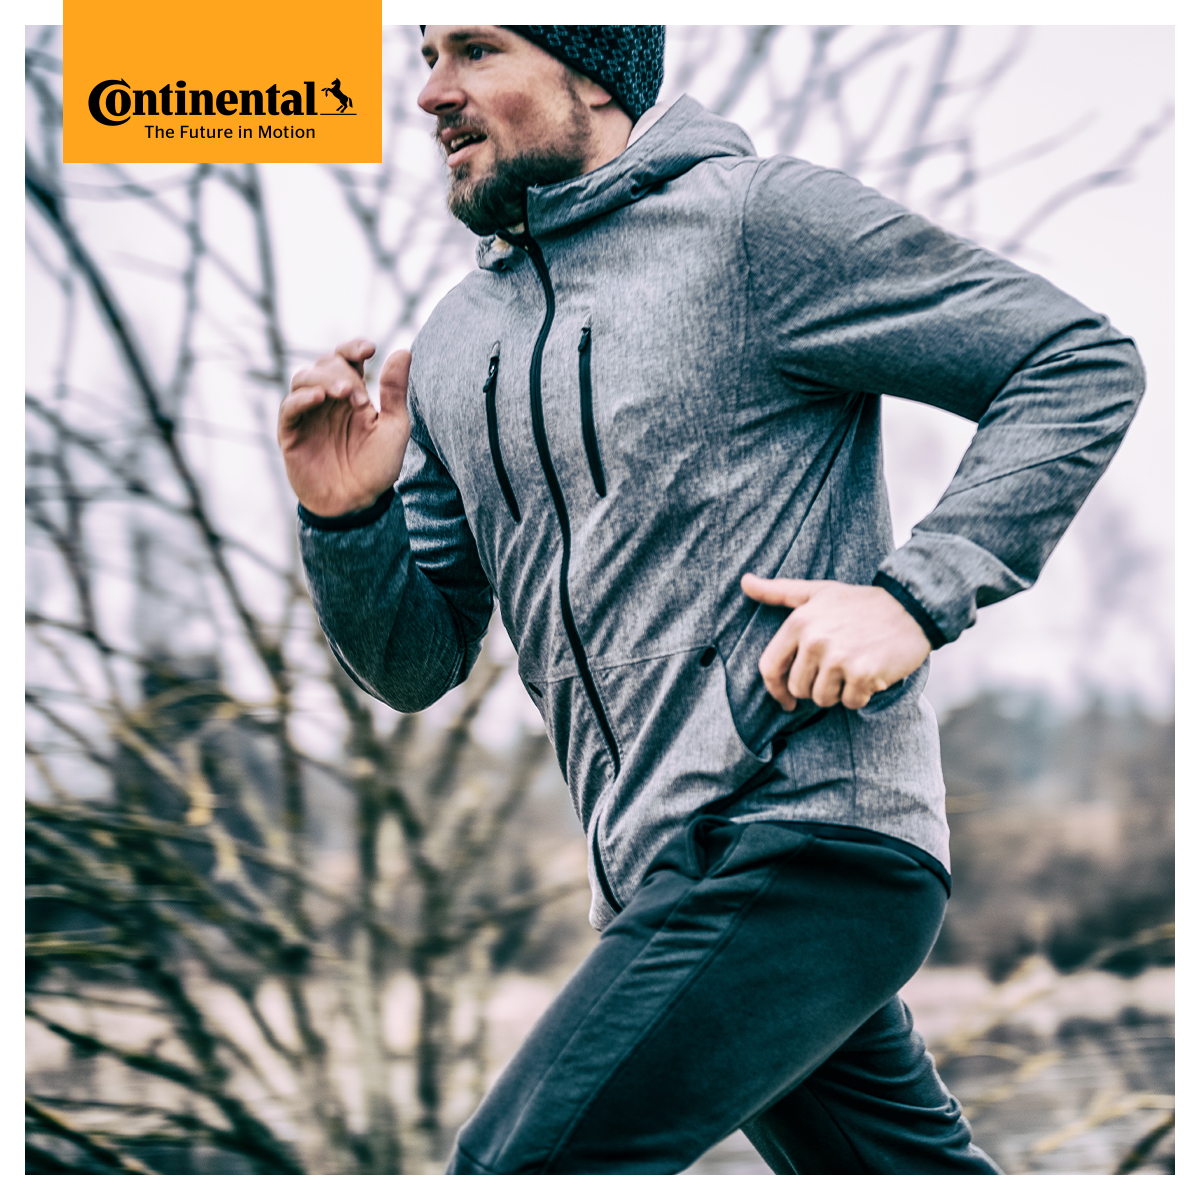 Yo Redada Desconexión Continental Tyres on Twitter: "With @adidas we'll keep you on your toes  even with winter around the corner. Our rubber soles will give you grip on  all terrains, whether icy, wet or